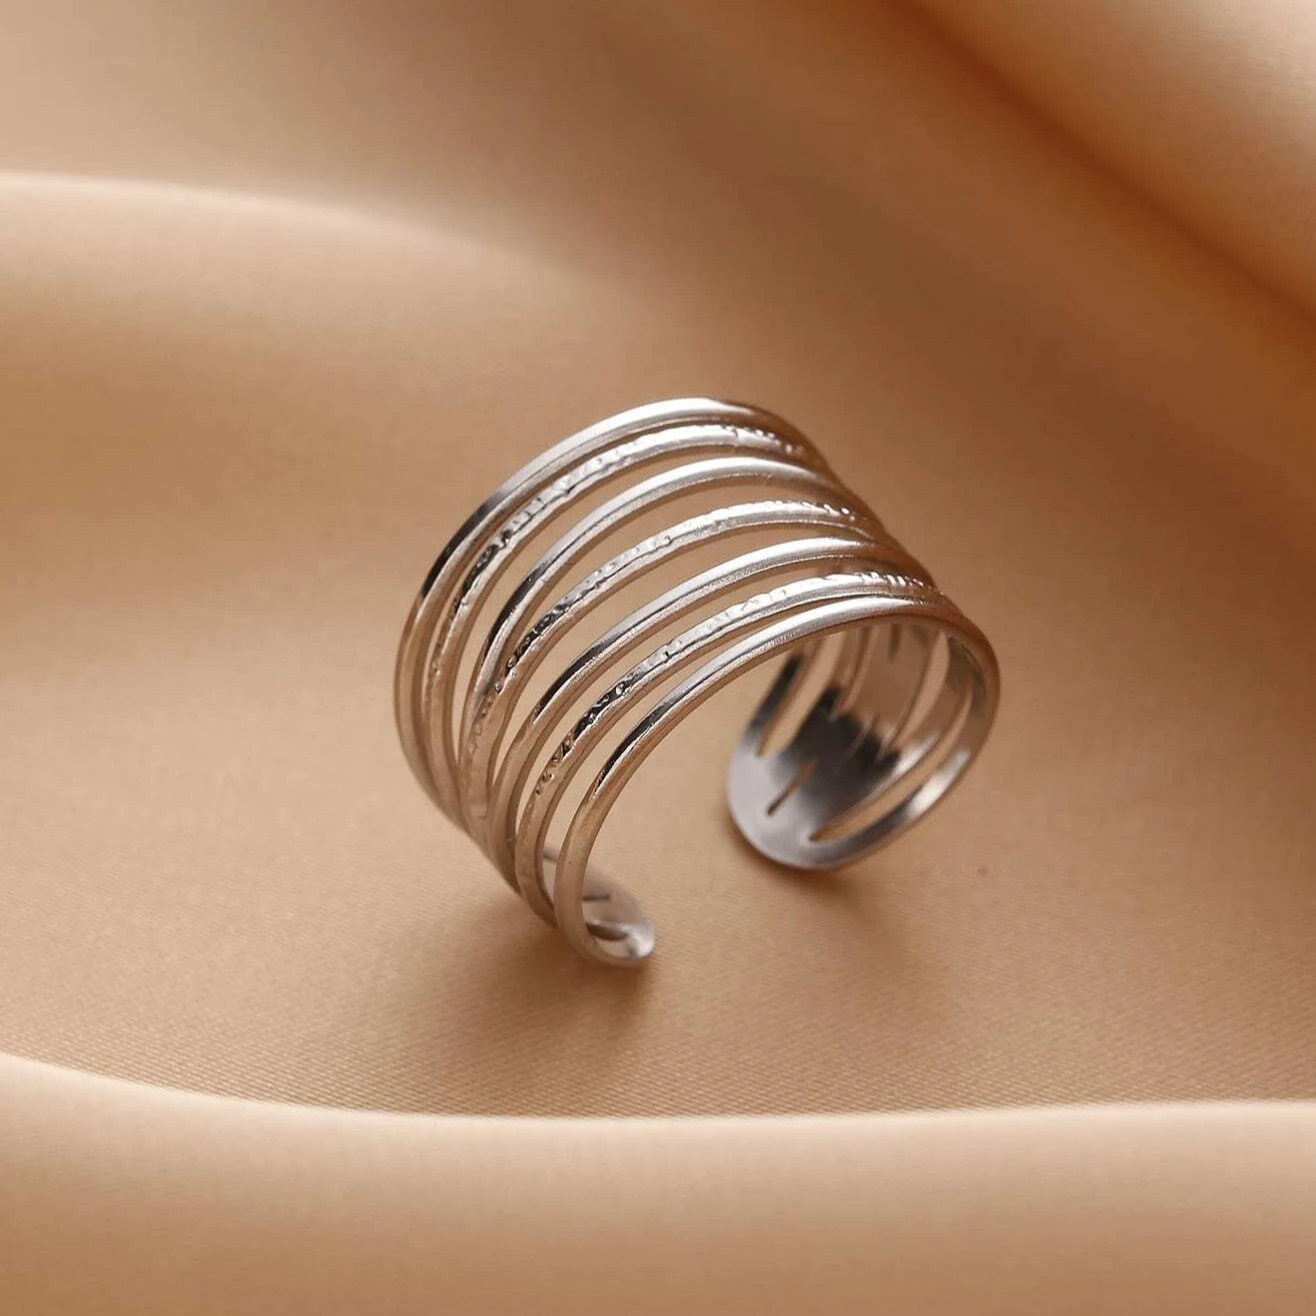 Vintage Thin Layered Silver Ring